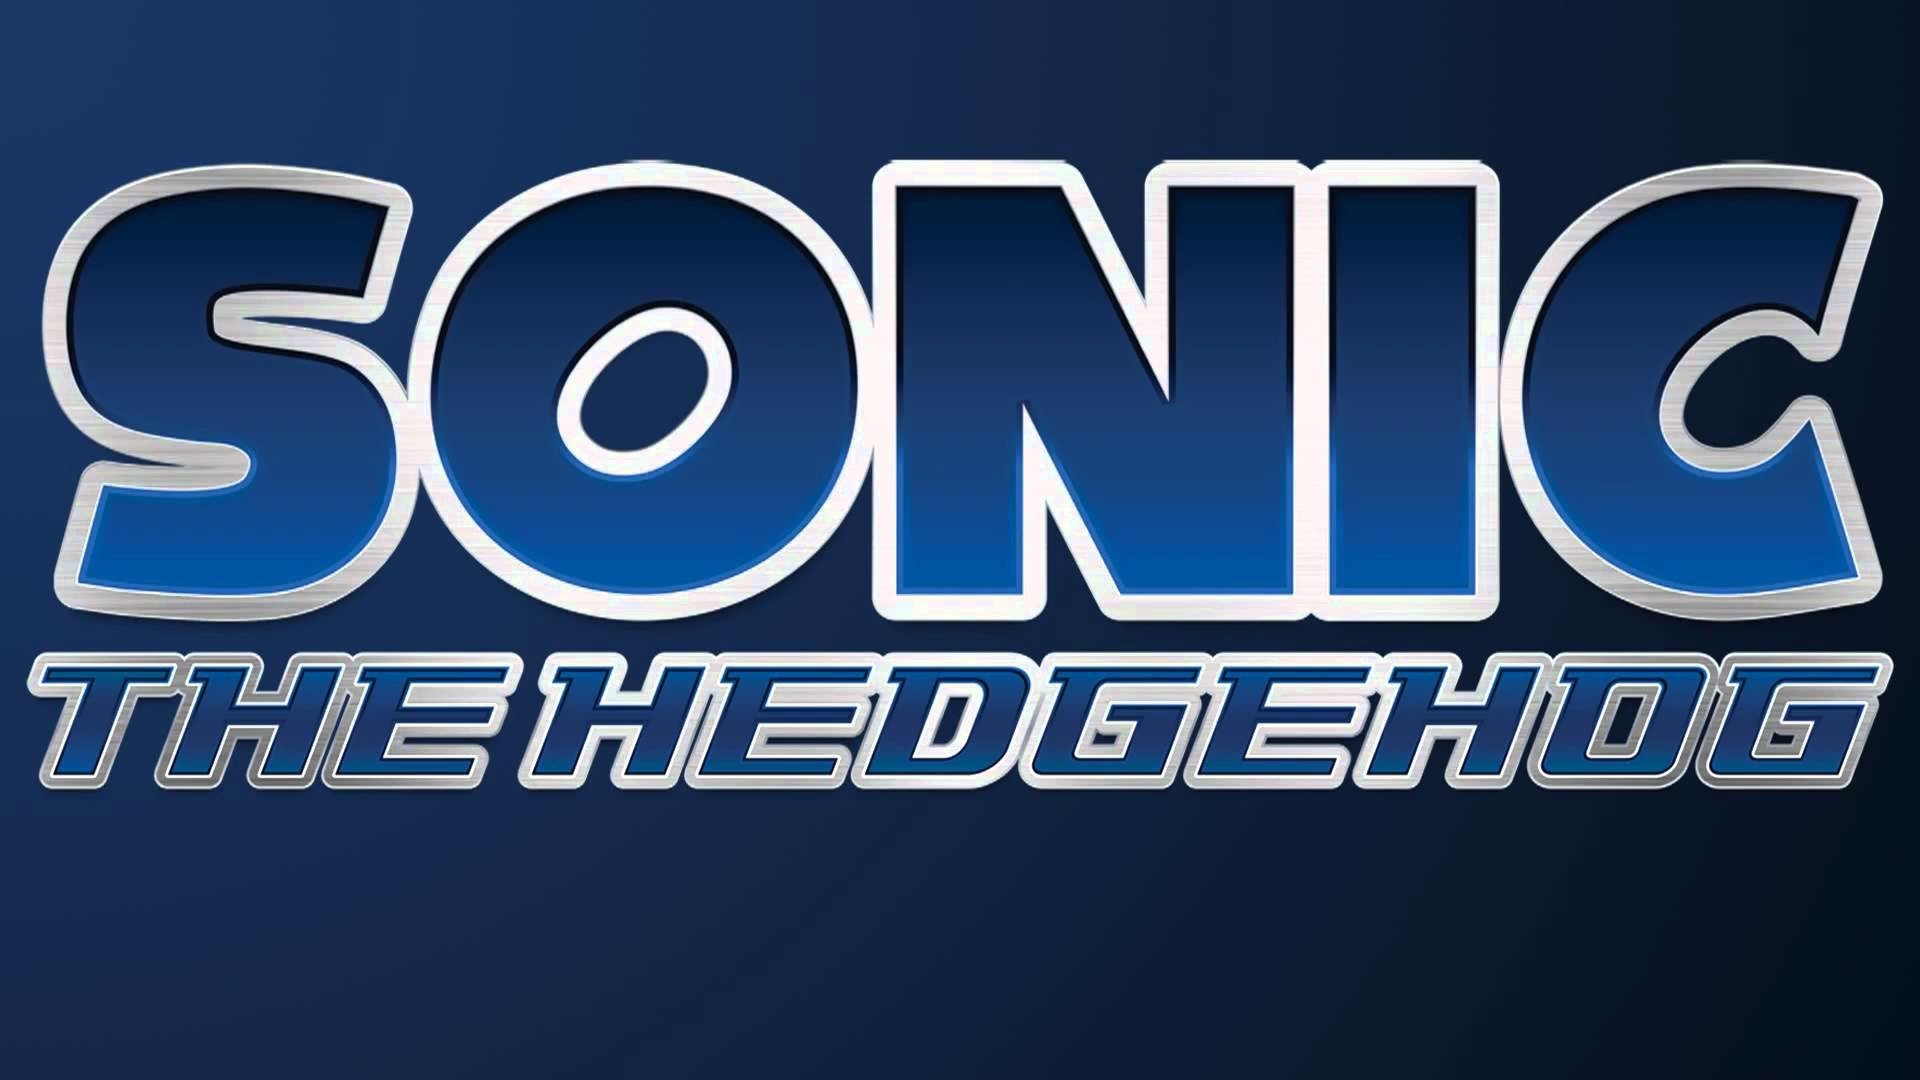 Sonic the Hedgehog (2006) Wallpapers